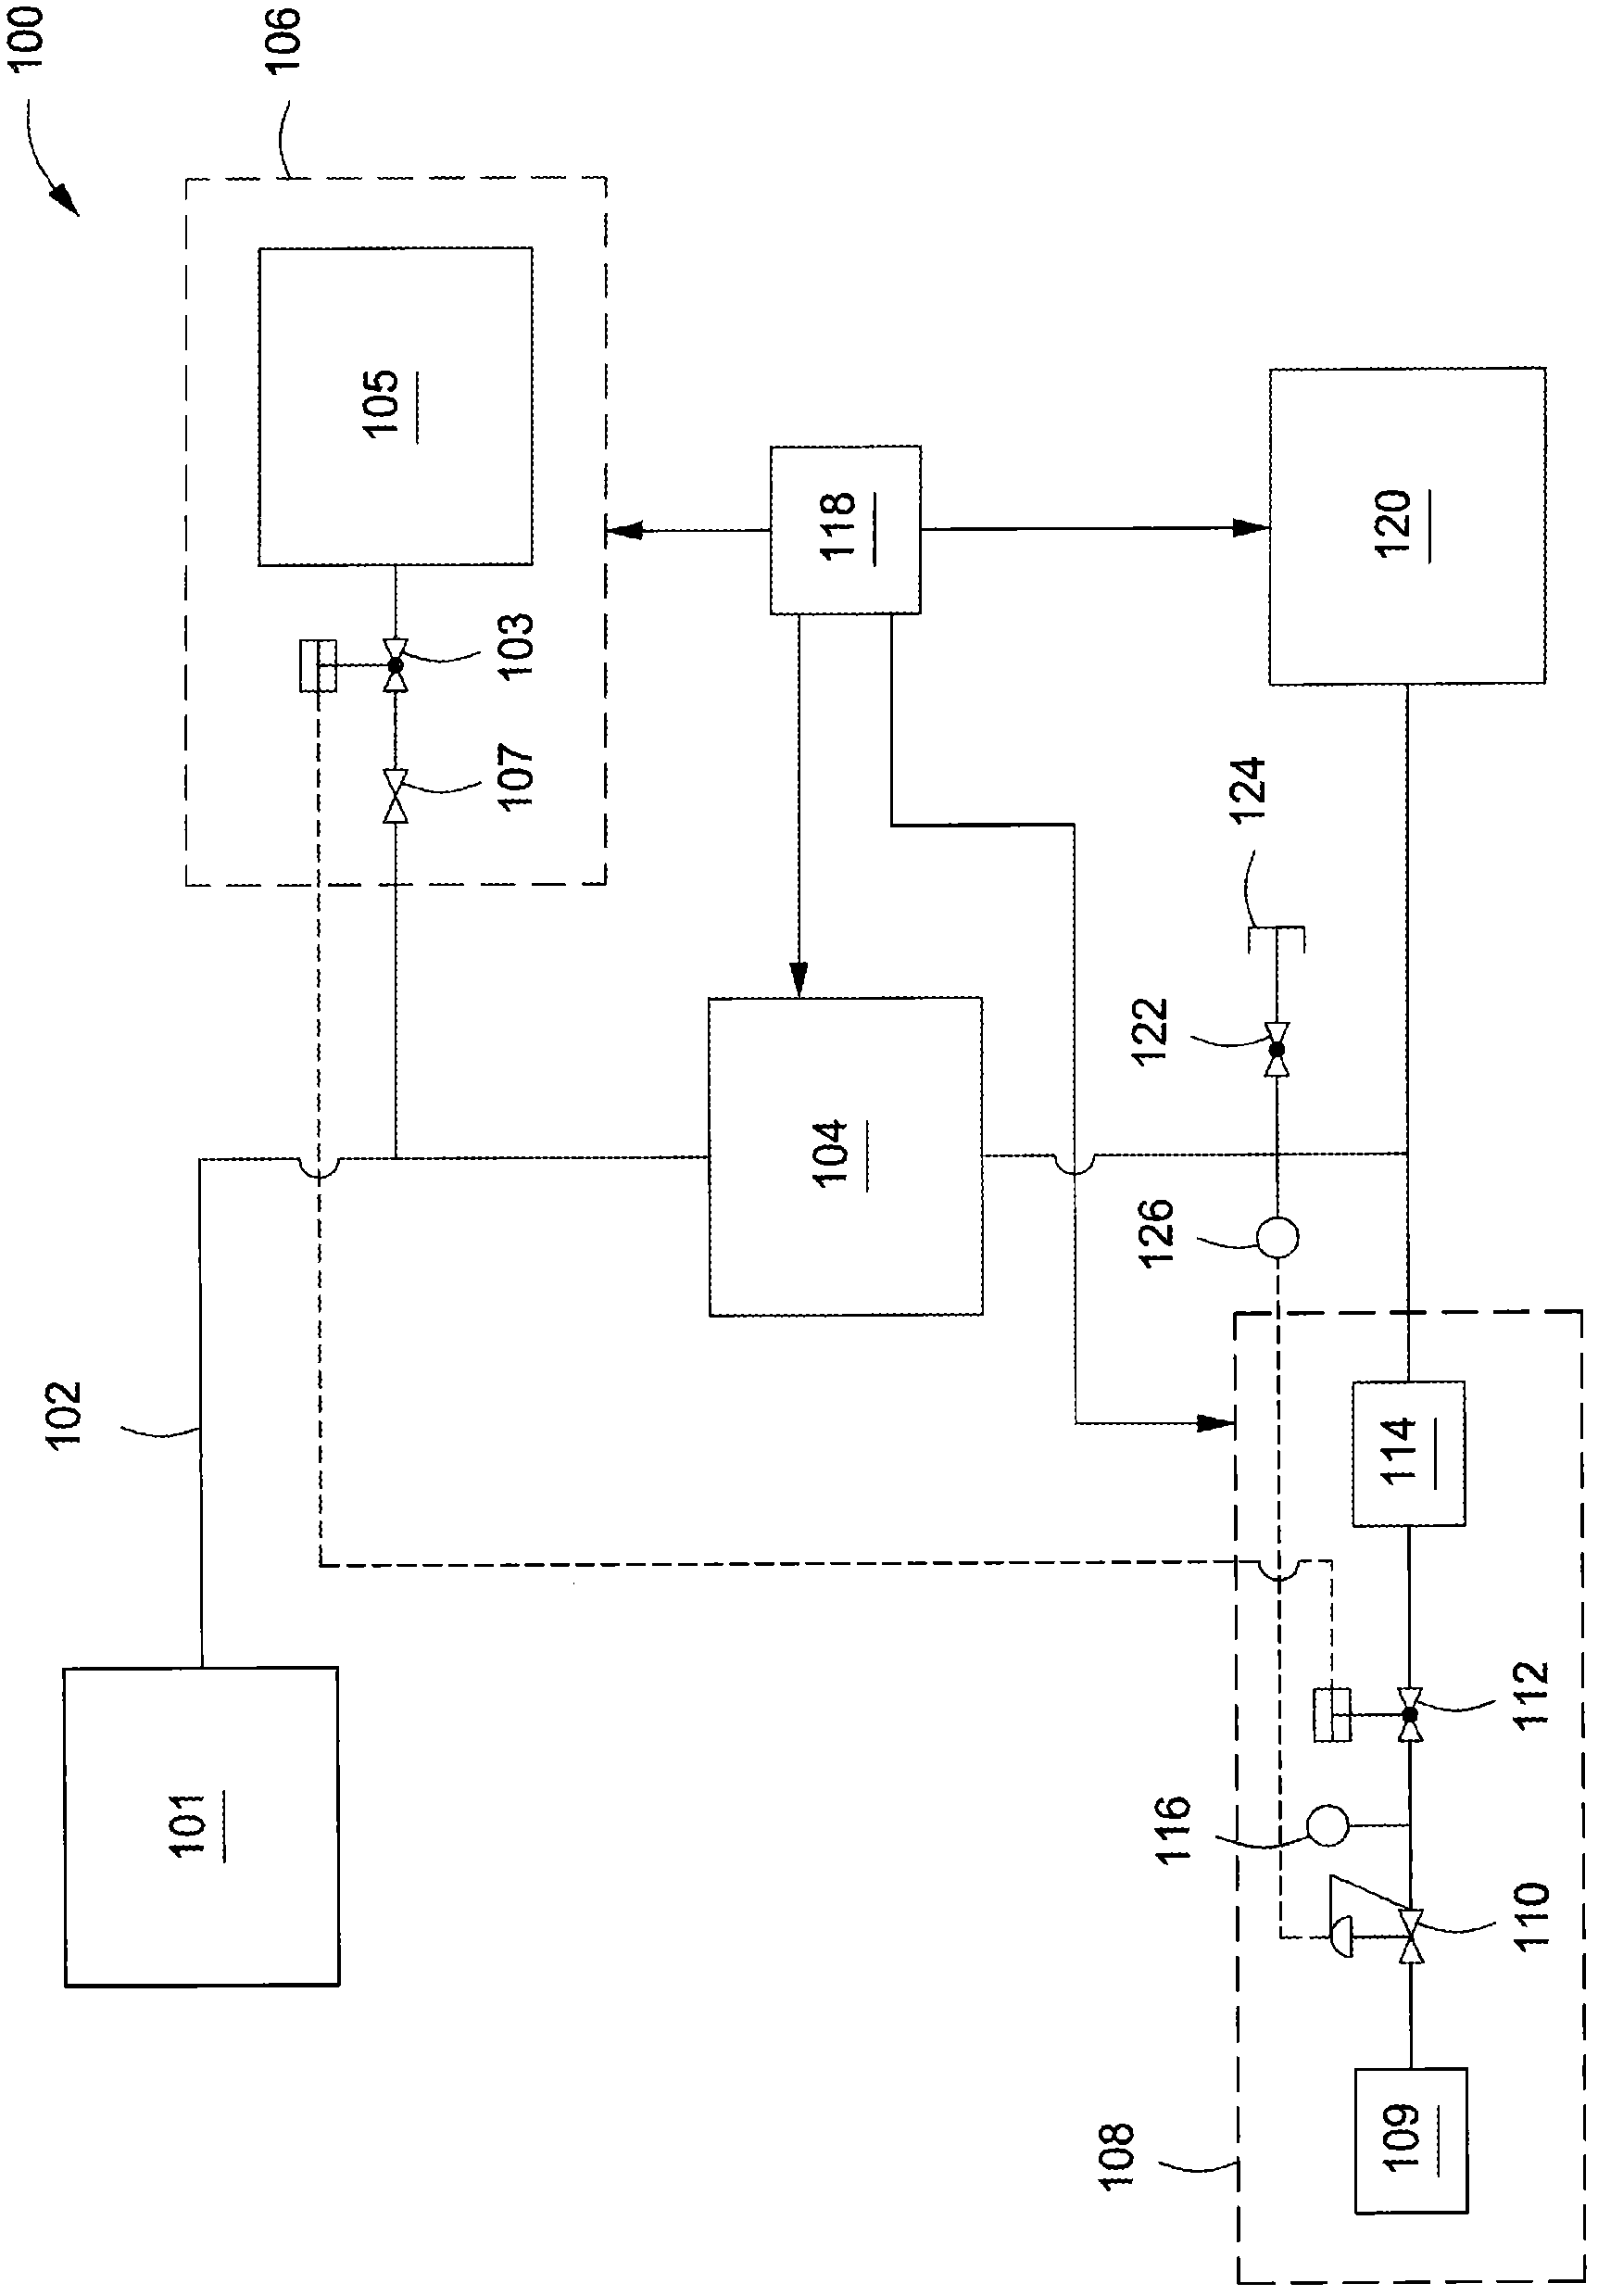 Methods and apparatus for treating exhaust gas in a processing system